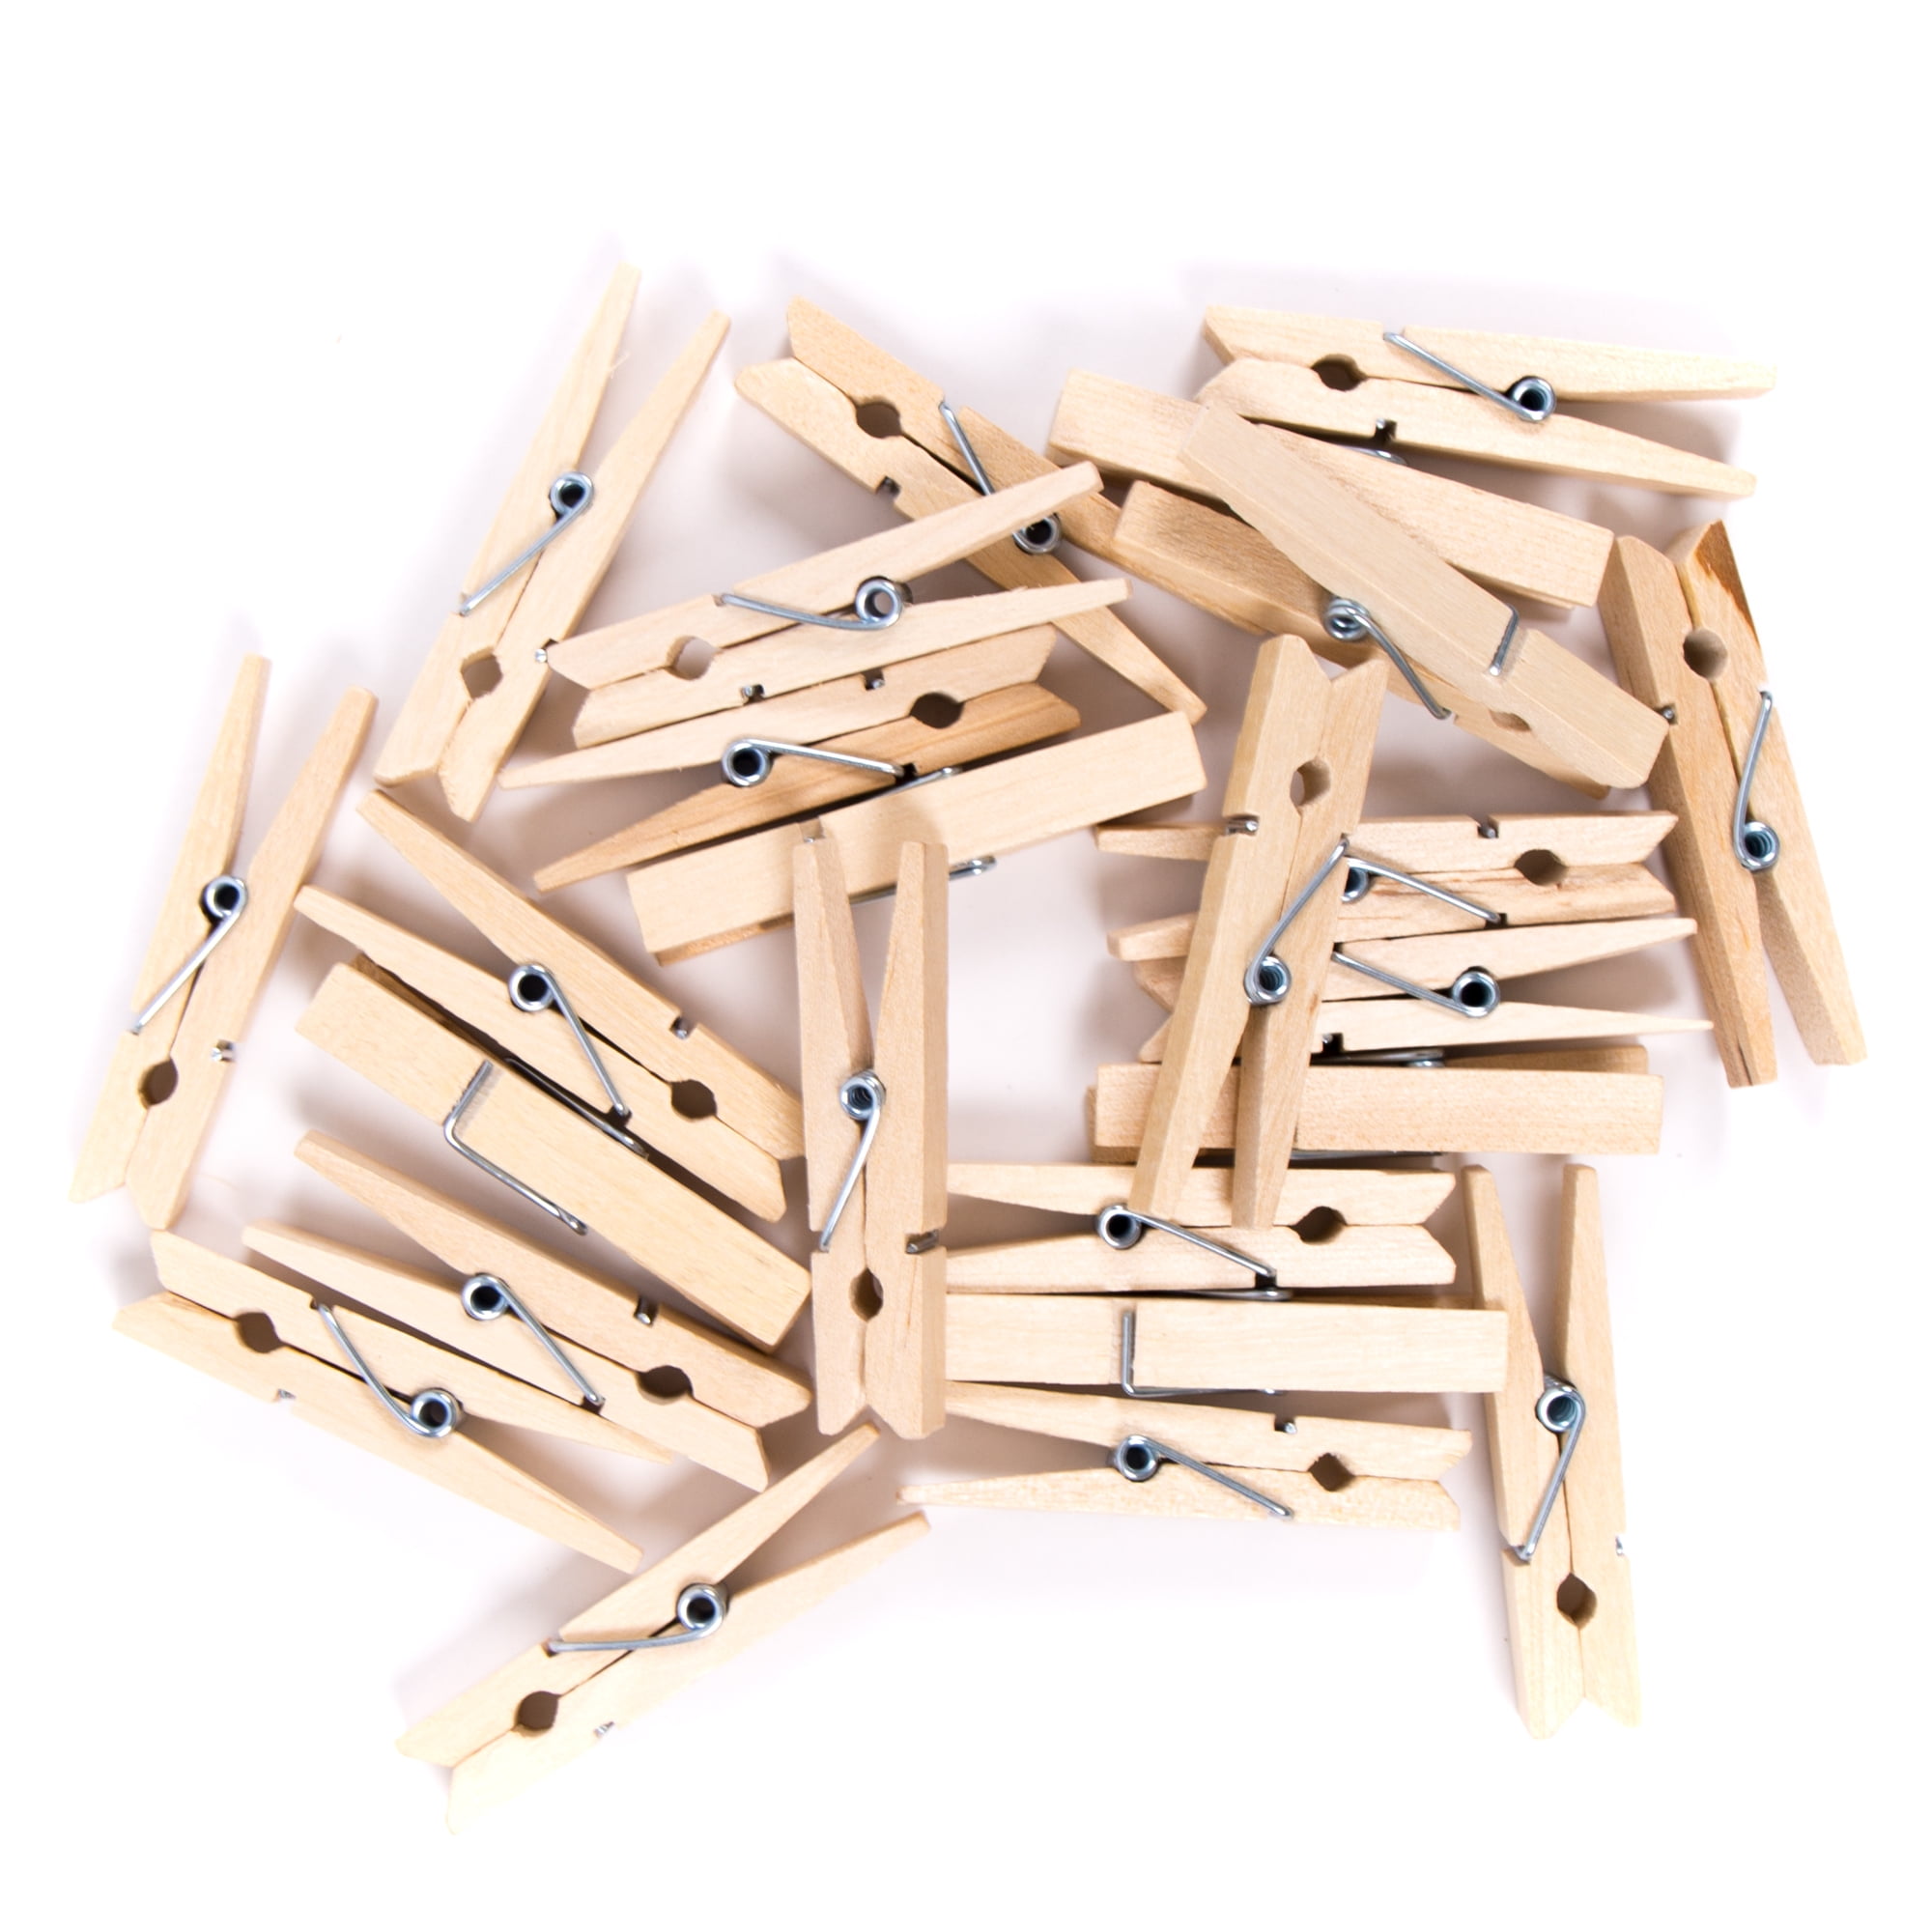 Multicraft 40-Piece Mini Wood Clothespins – Good's Store Online